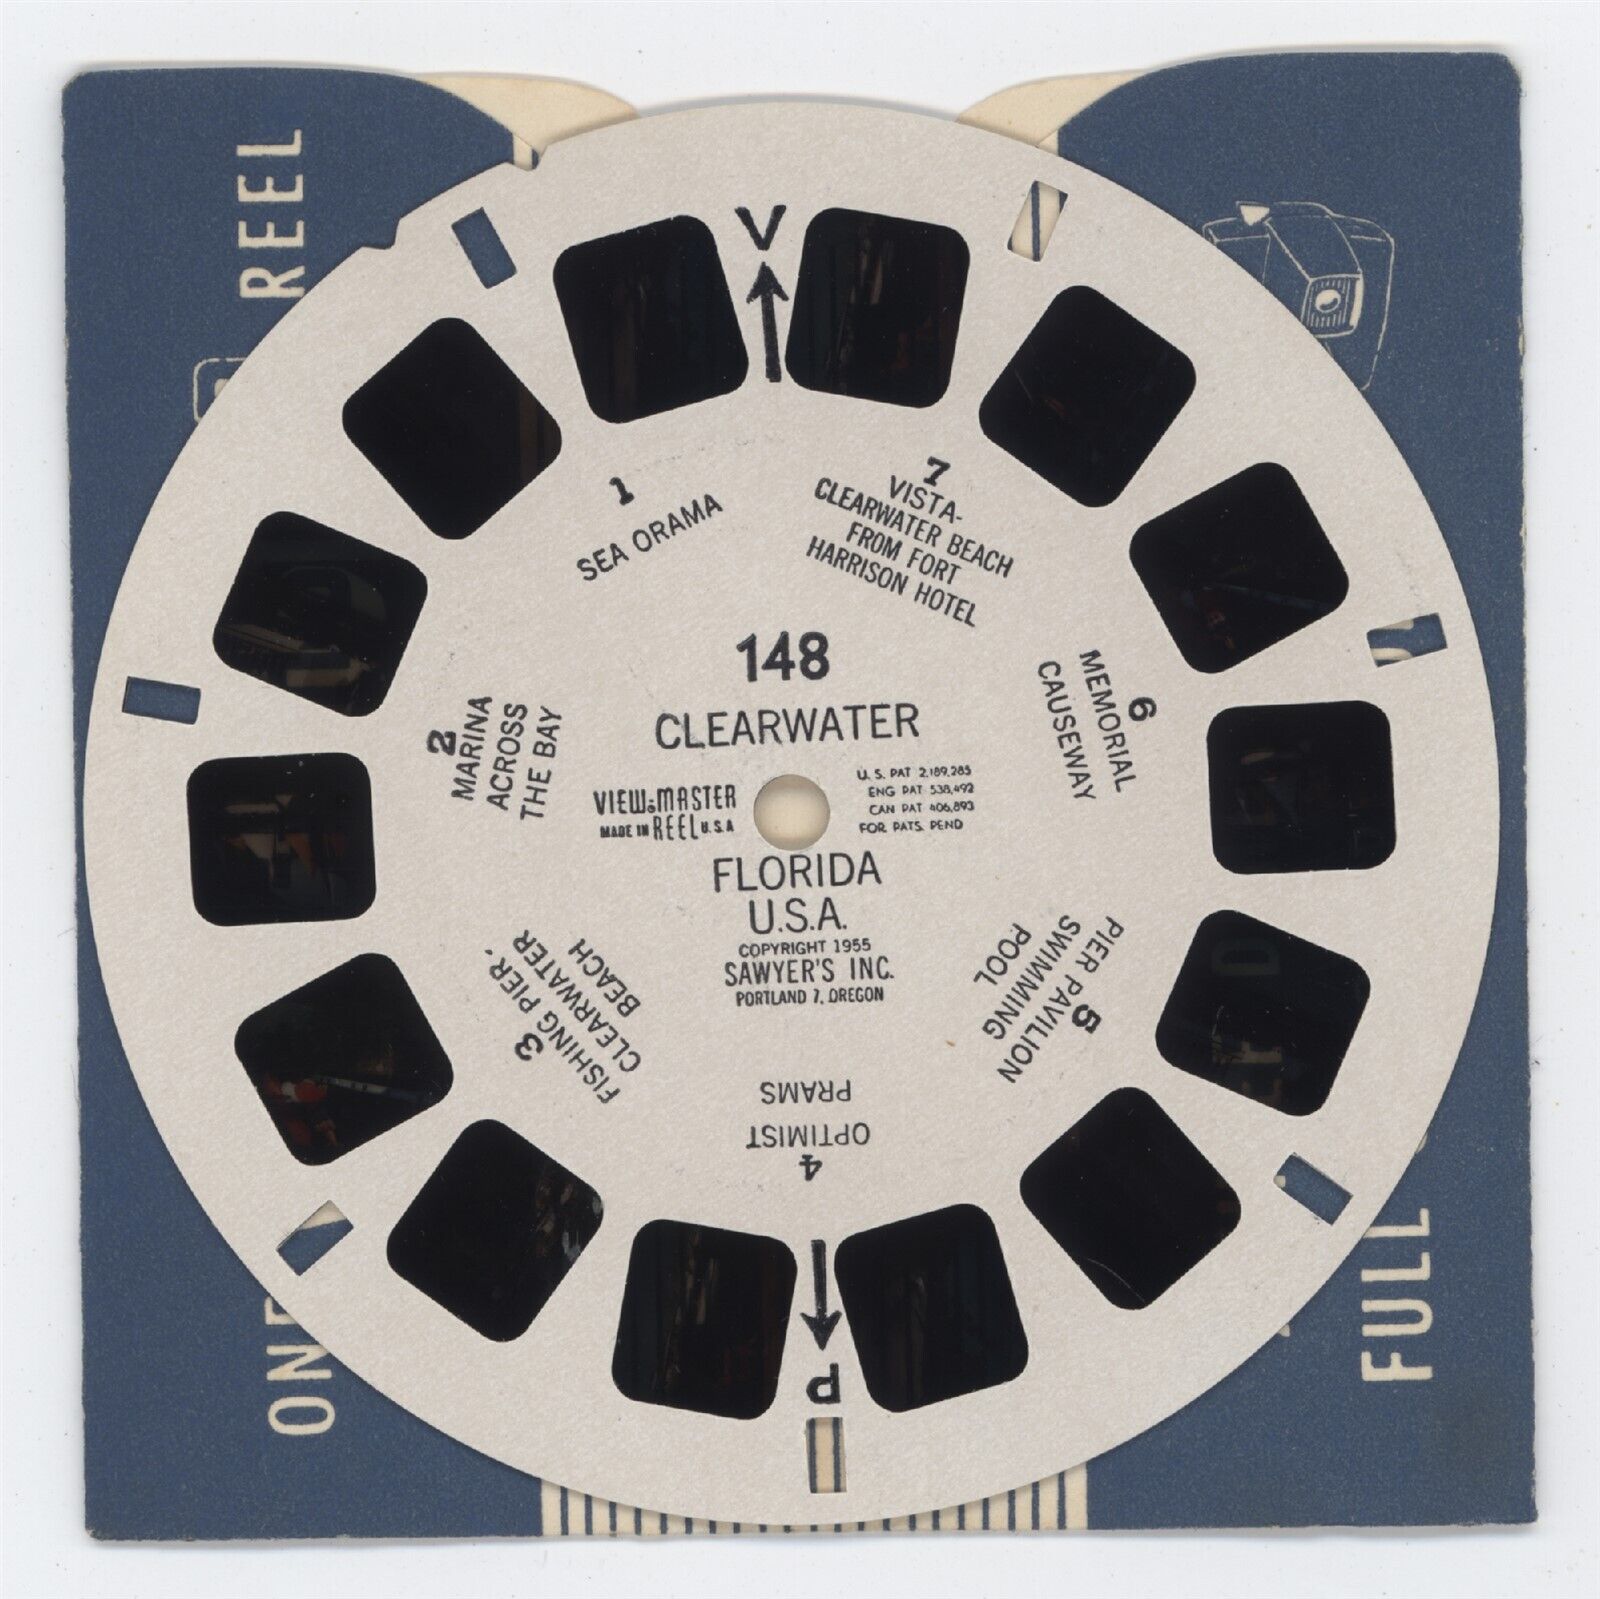 RARE View-Master Reel 148, Clearwater, Florida, 1955 - MINT 